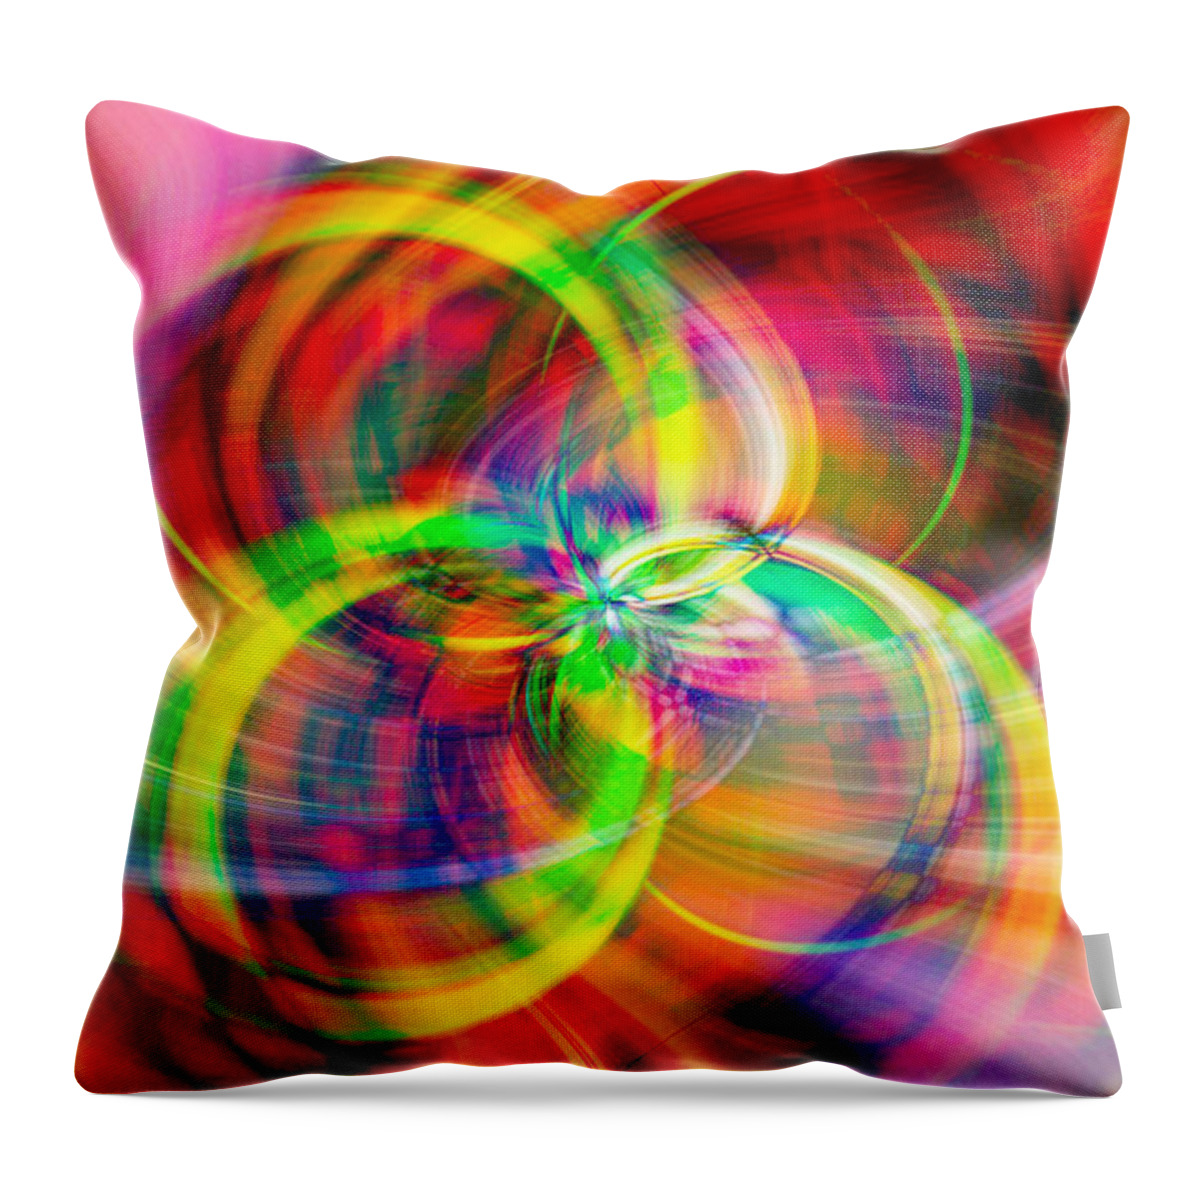 Swirls Throw Pillow featuring the photograph Layered Swirls by Cathy Donohoue